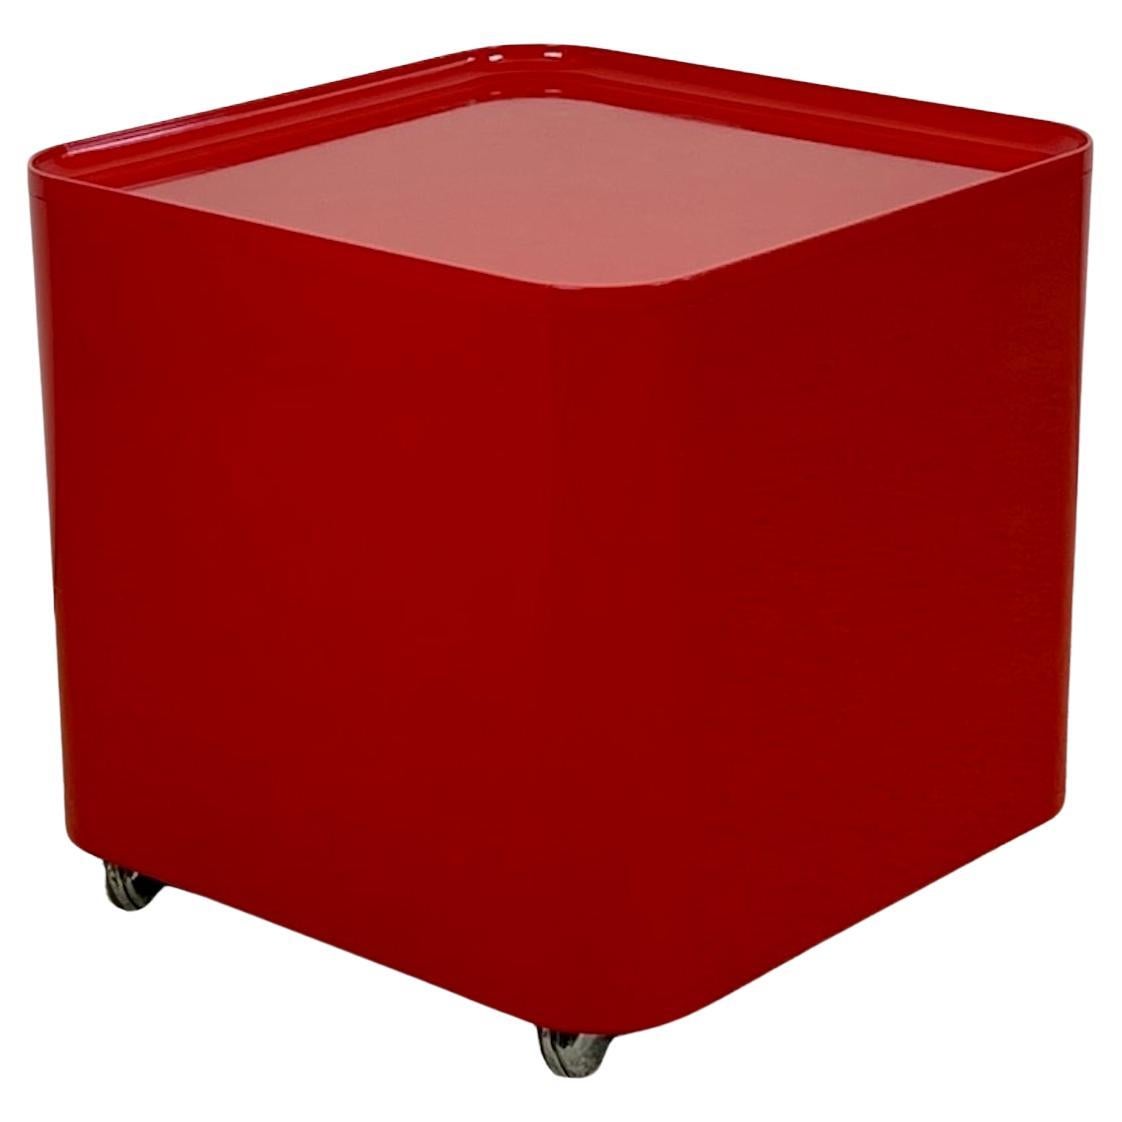 Space Age70s Red Table with Container DIME by Marcello Siard for Longato